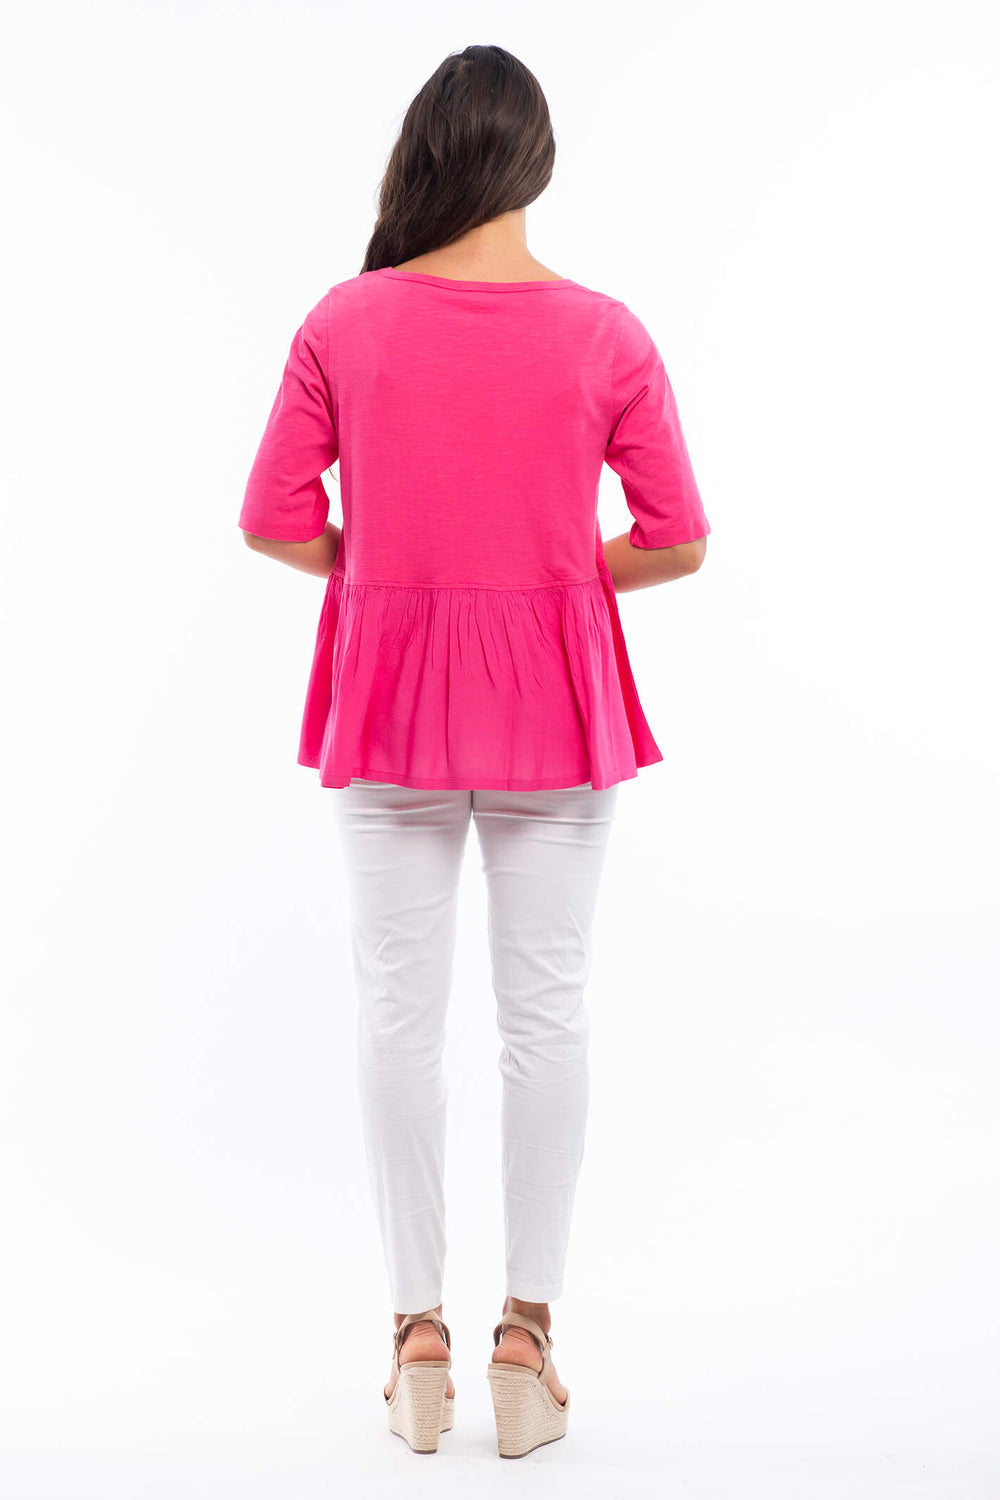 Orientique 12213 Pink Orchard Knit Top - Shirley Allum Boutique